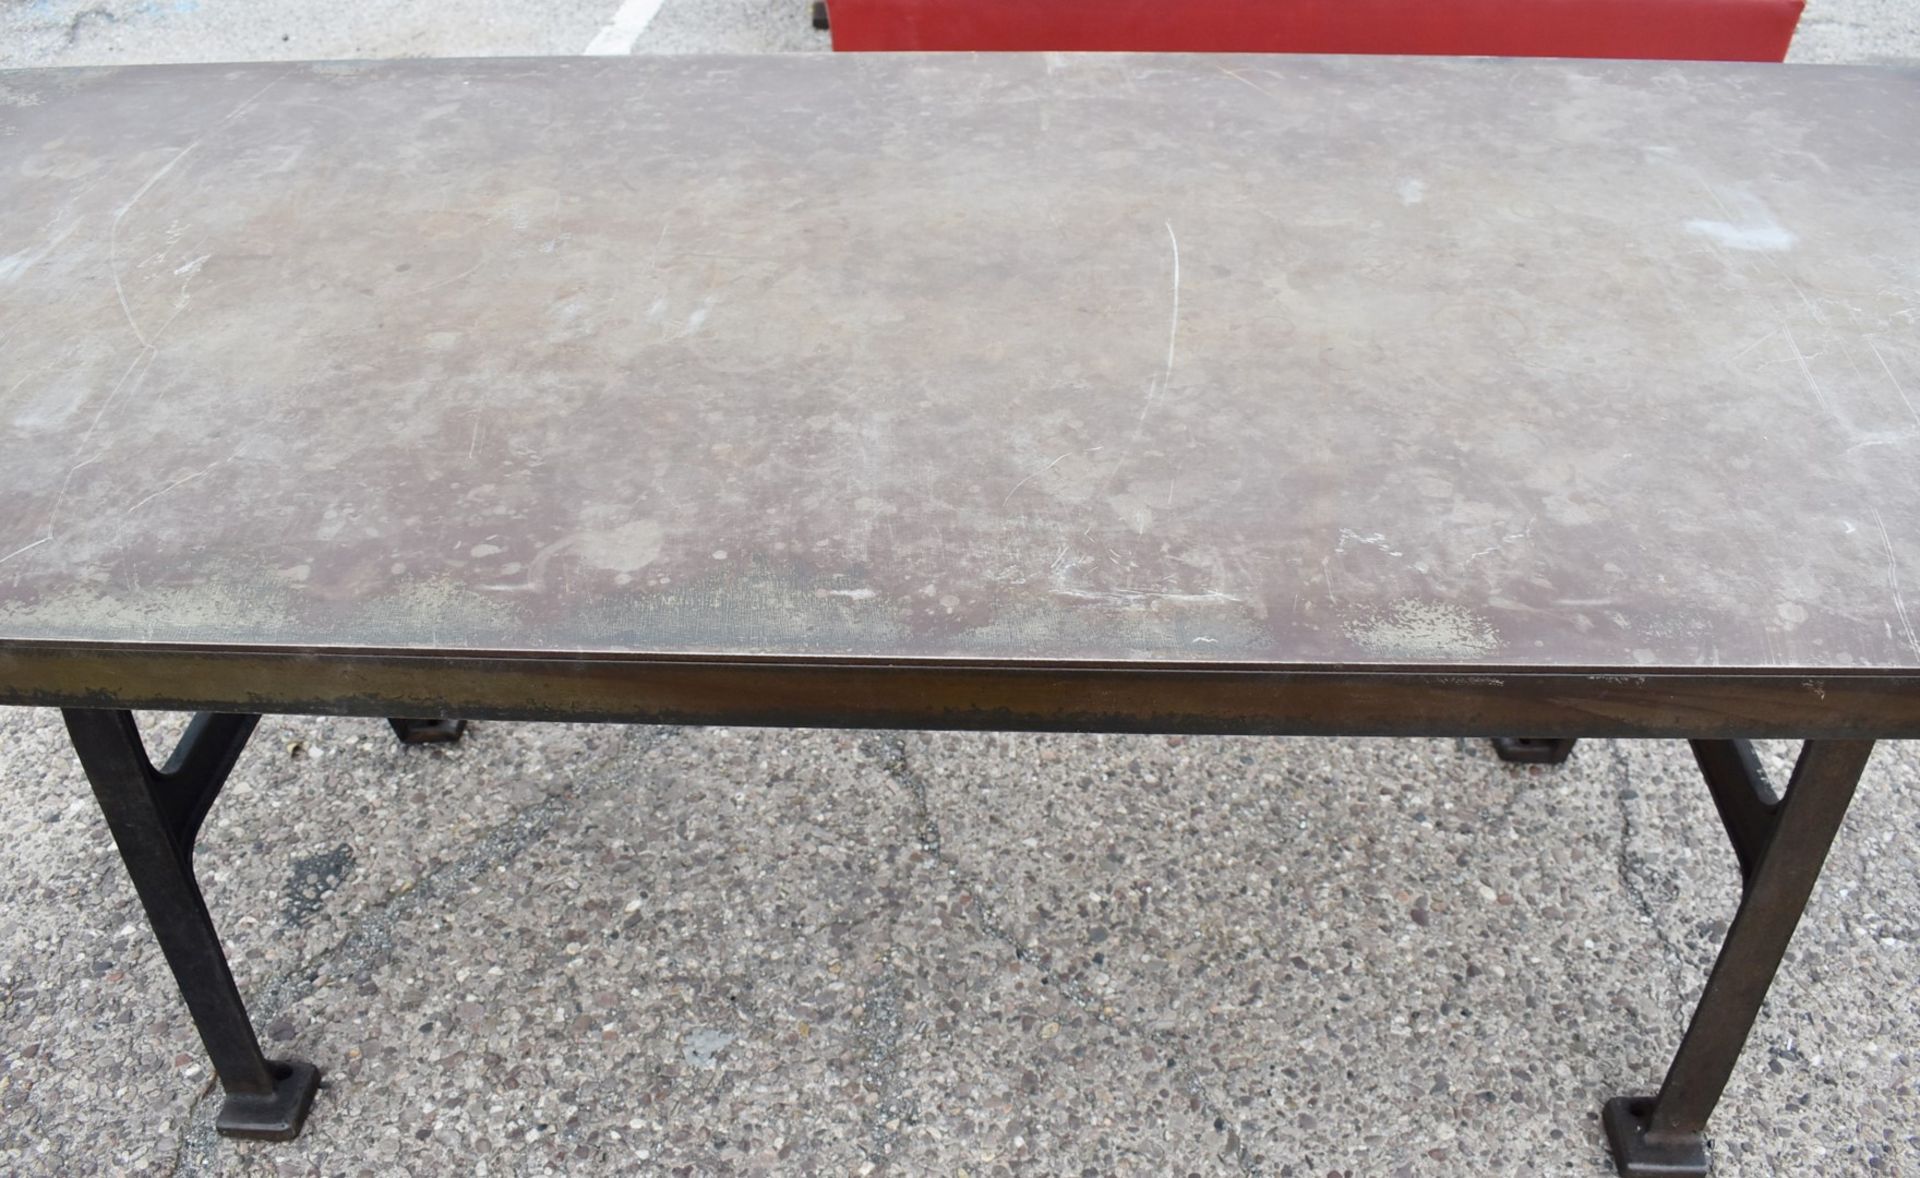 1 x Industrial Style 200cm Banquetting Restaurant Table Featuring a Heavy Steel Top & Steel Legs - Image 5 of 23